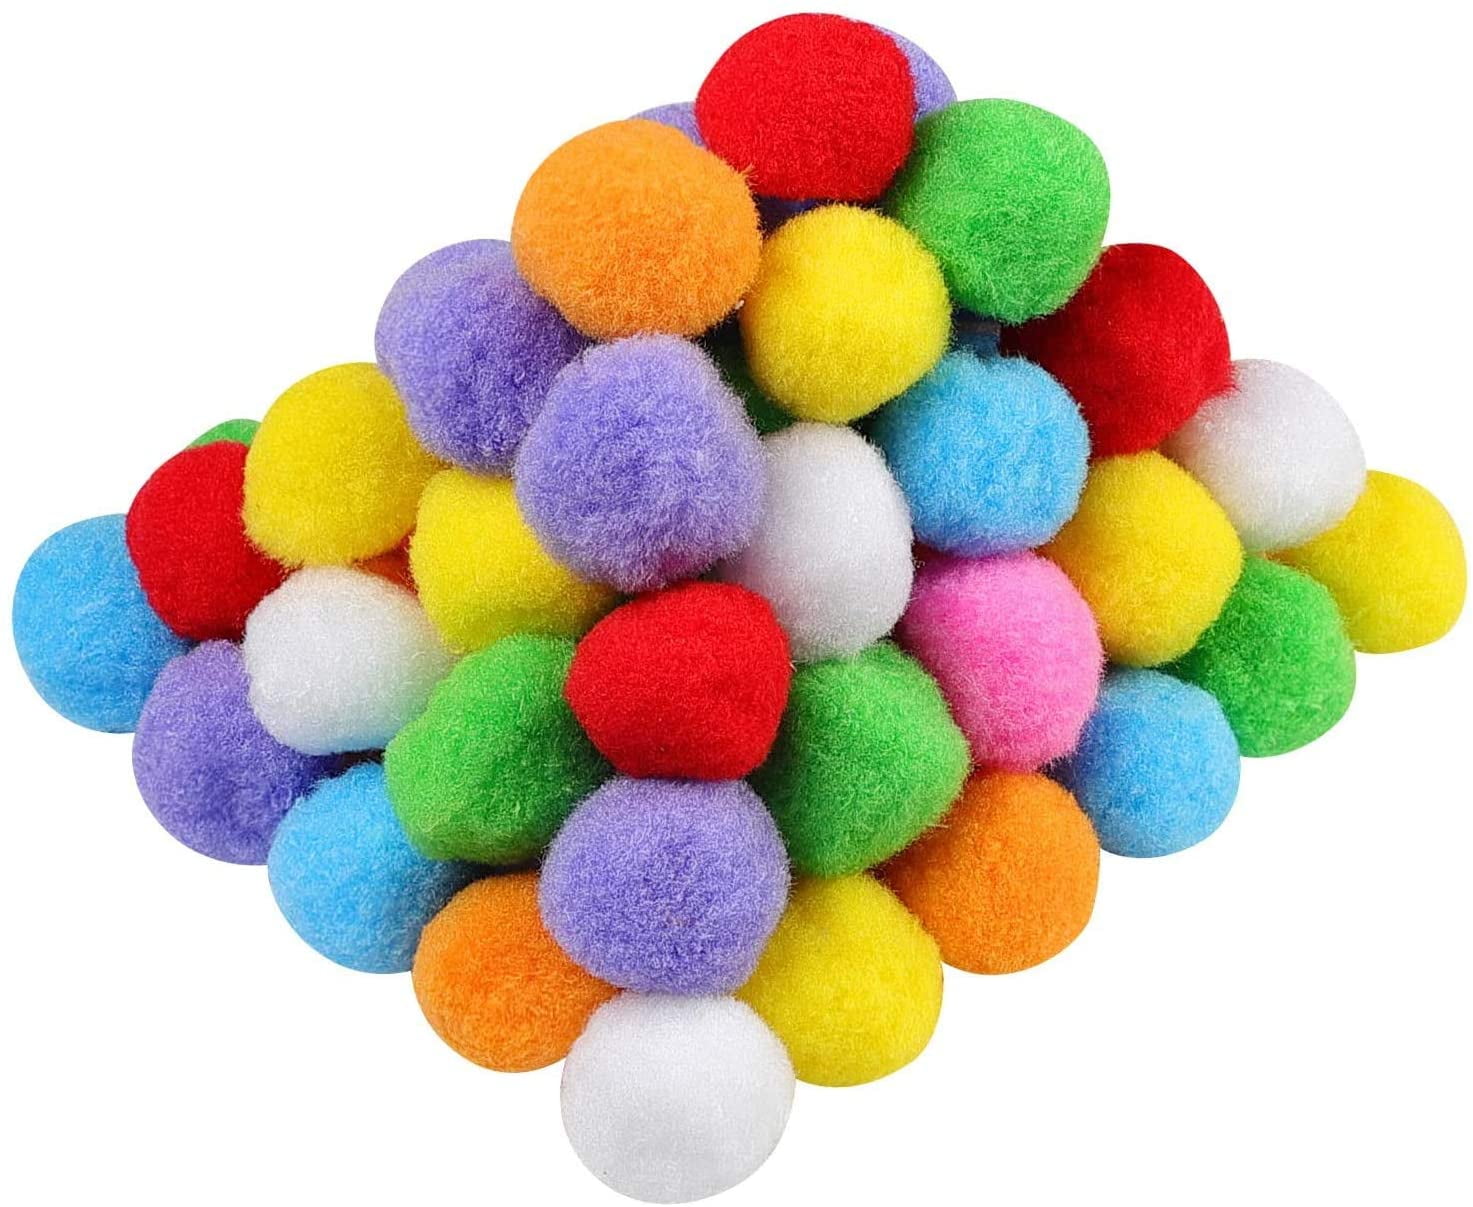 Christmas Colour 25mm Red,Green and White Craft Pom Poms-Pack of 50 